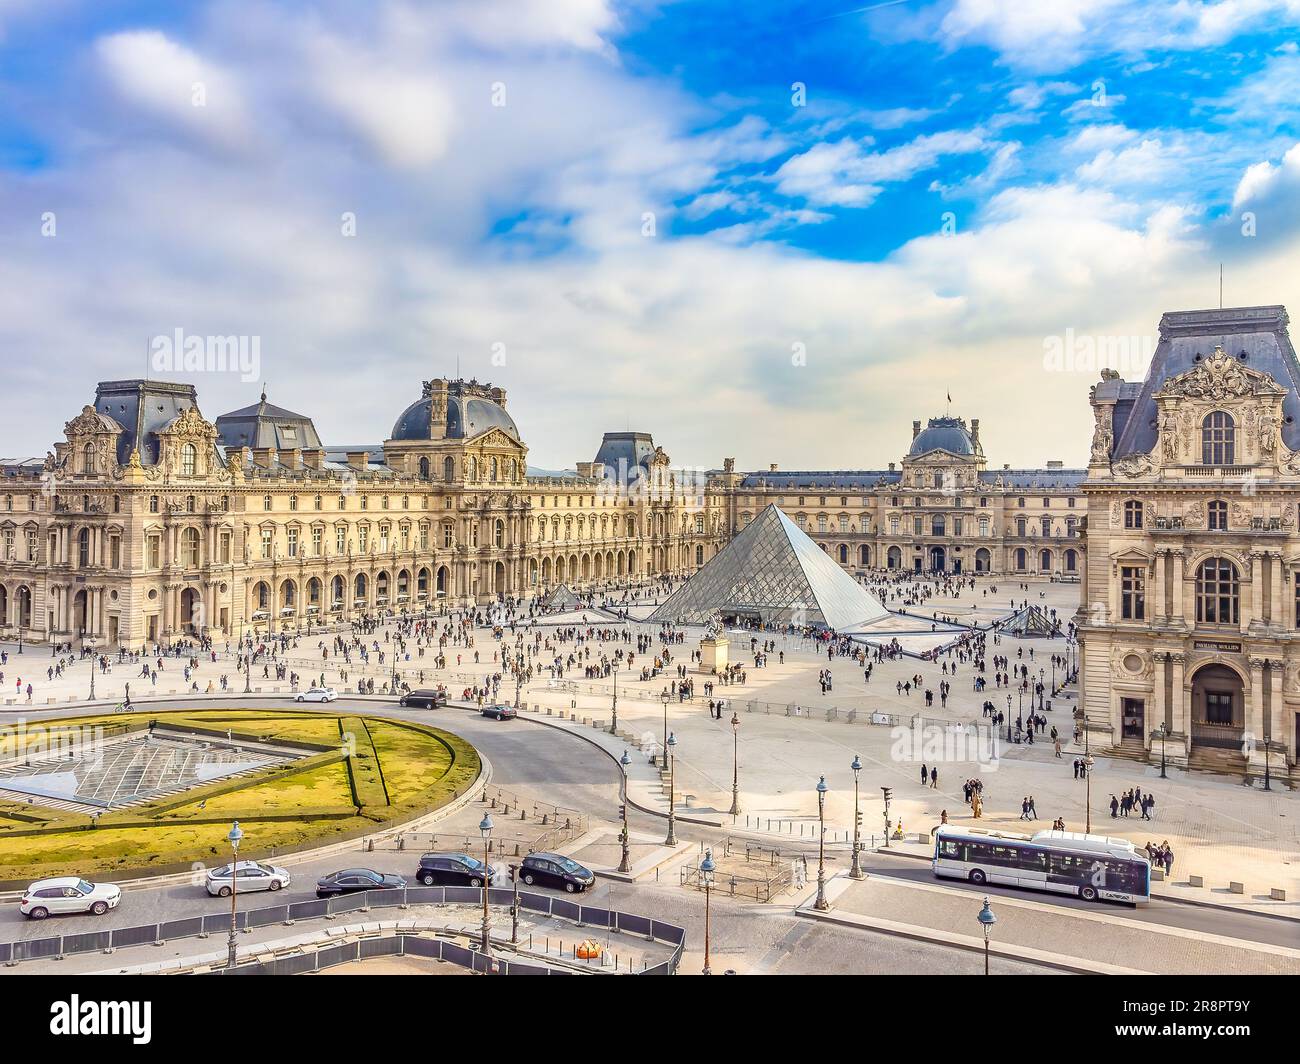 Aerial drone view of the Louvre palace and museum, one of the most iconic places in Paris, France Stock Photo